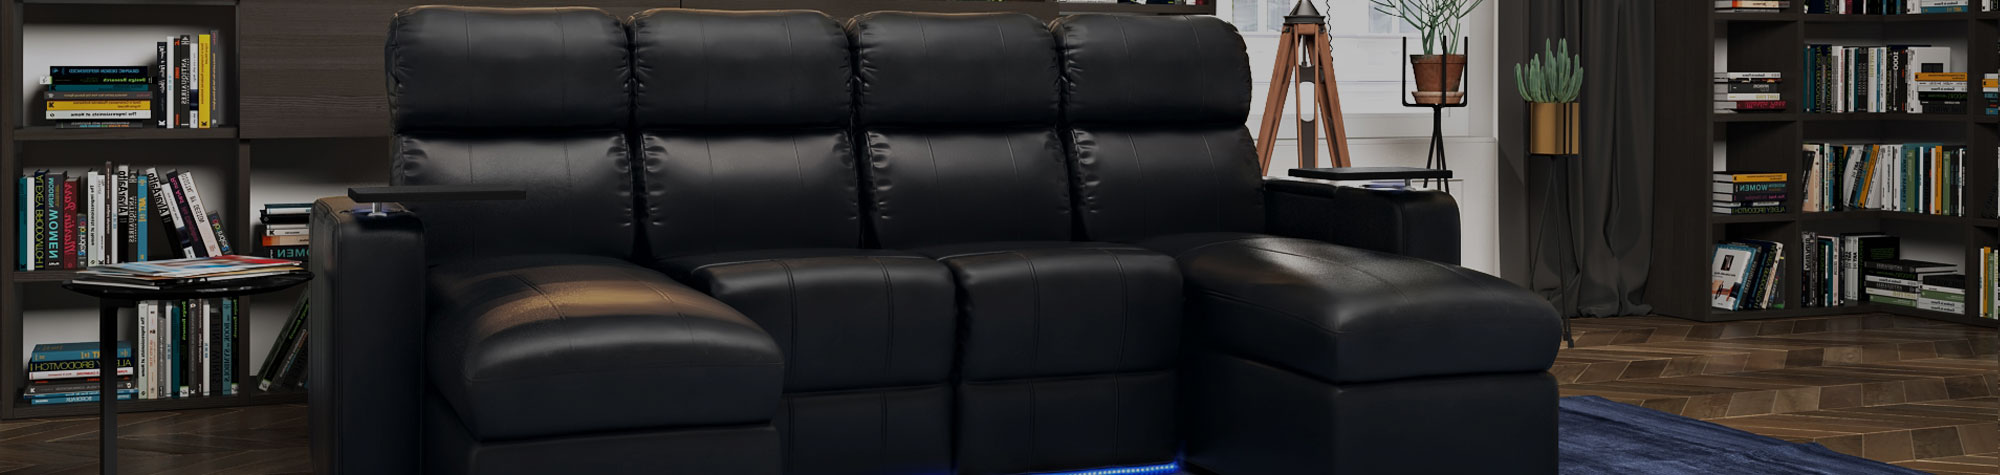 Top Sofas For Your Media Room